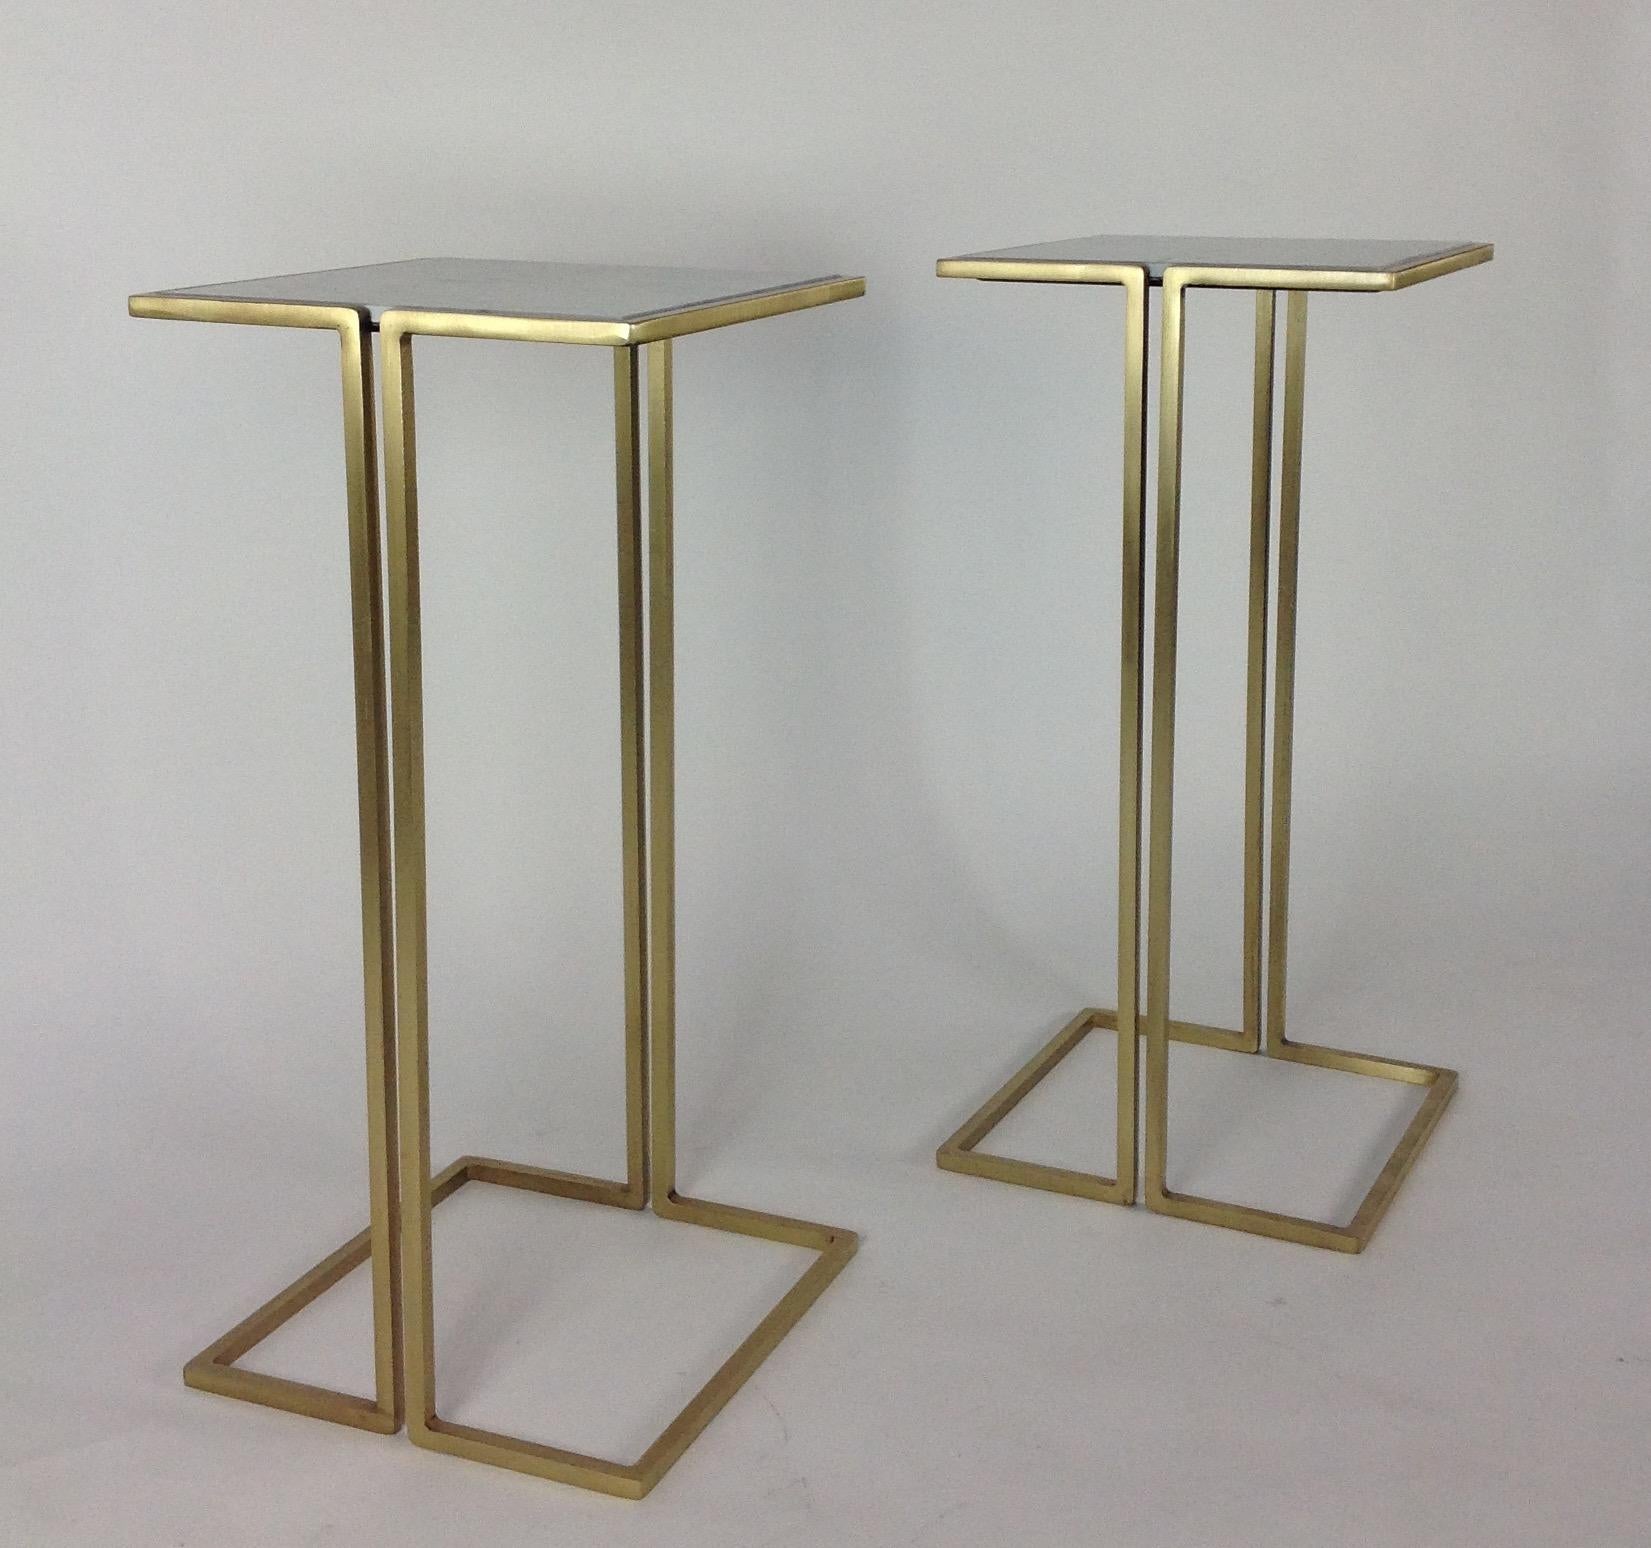 Contemporary Nantes Side Tables, Model D, Satin Brass by Bourgeois Boheme Atelier For Sale